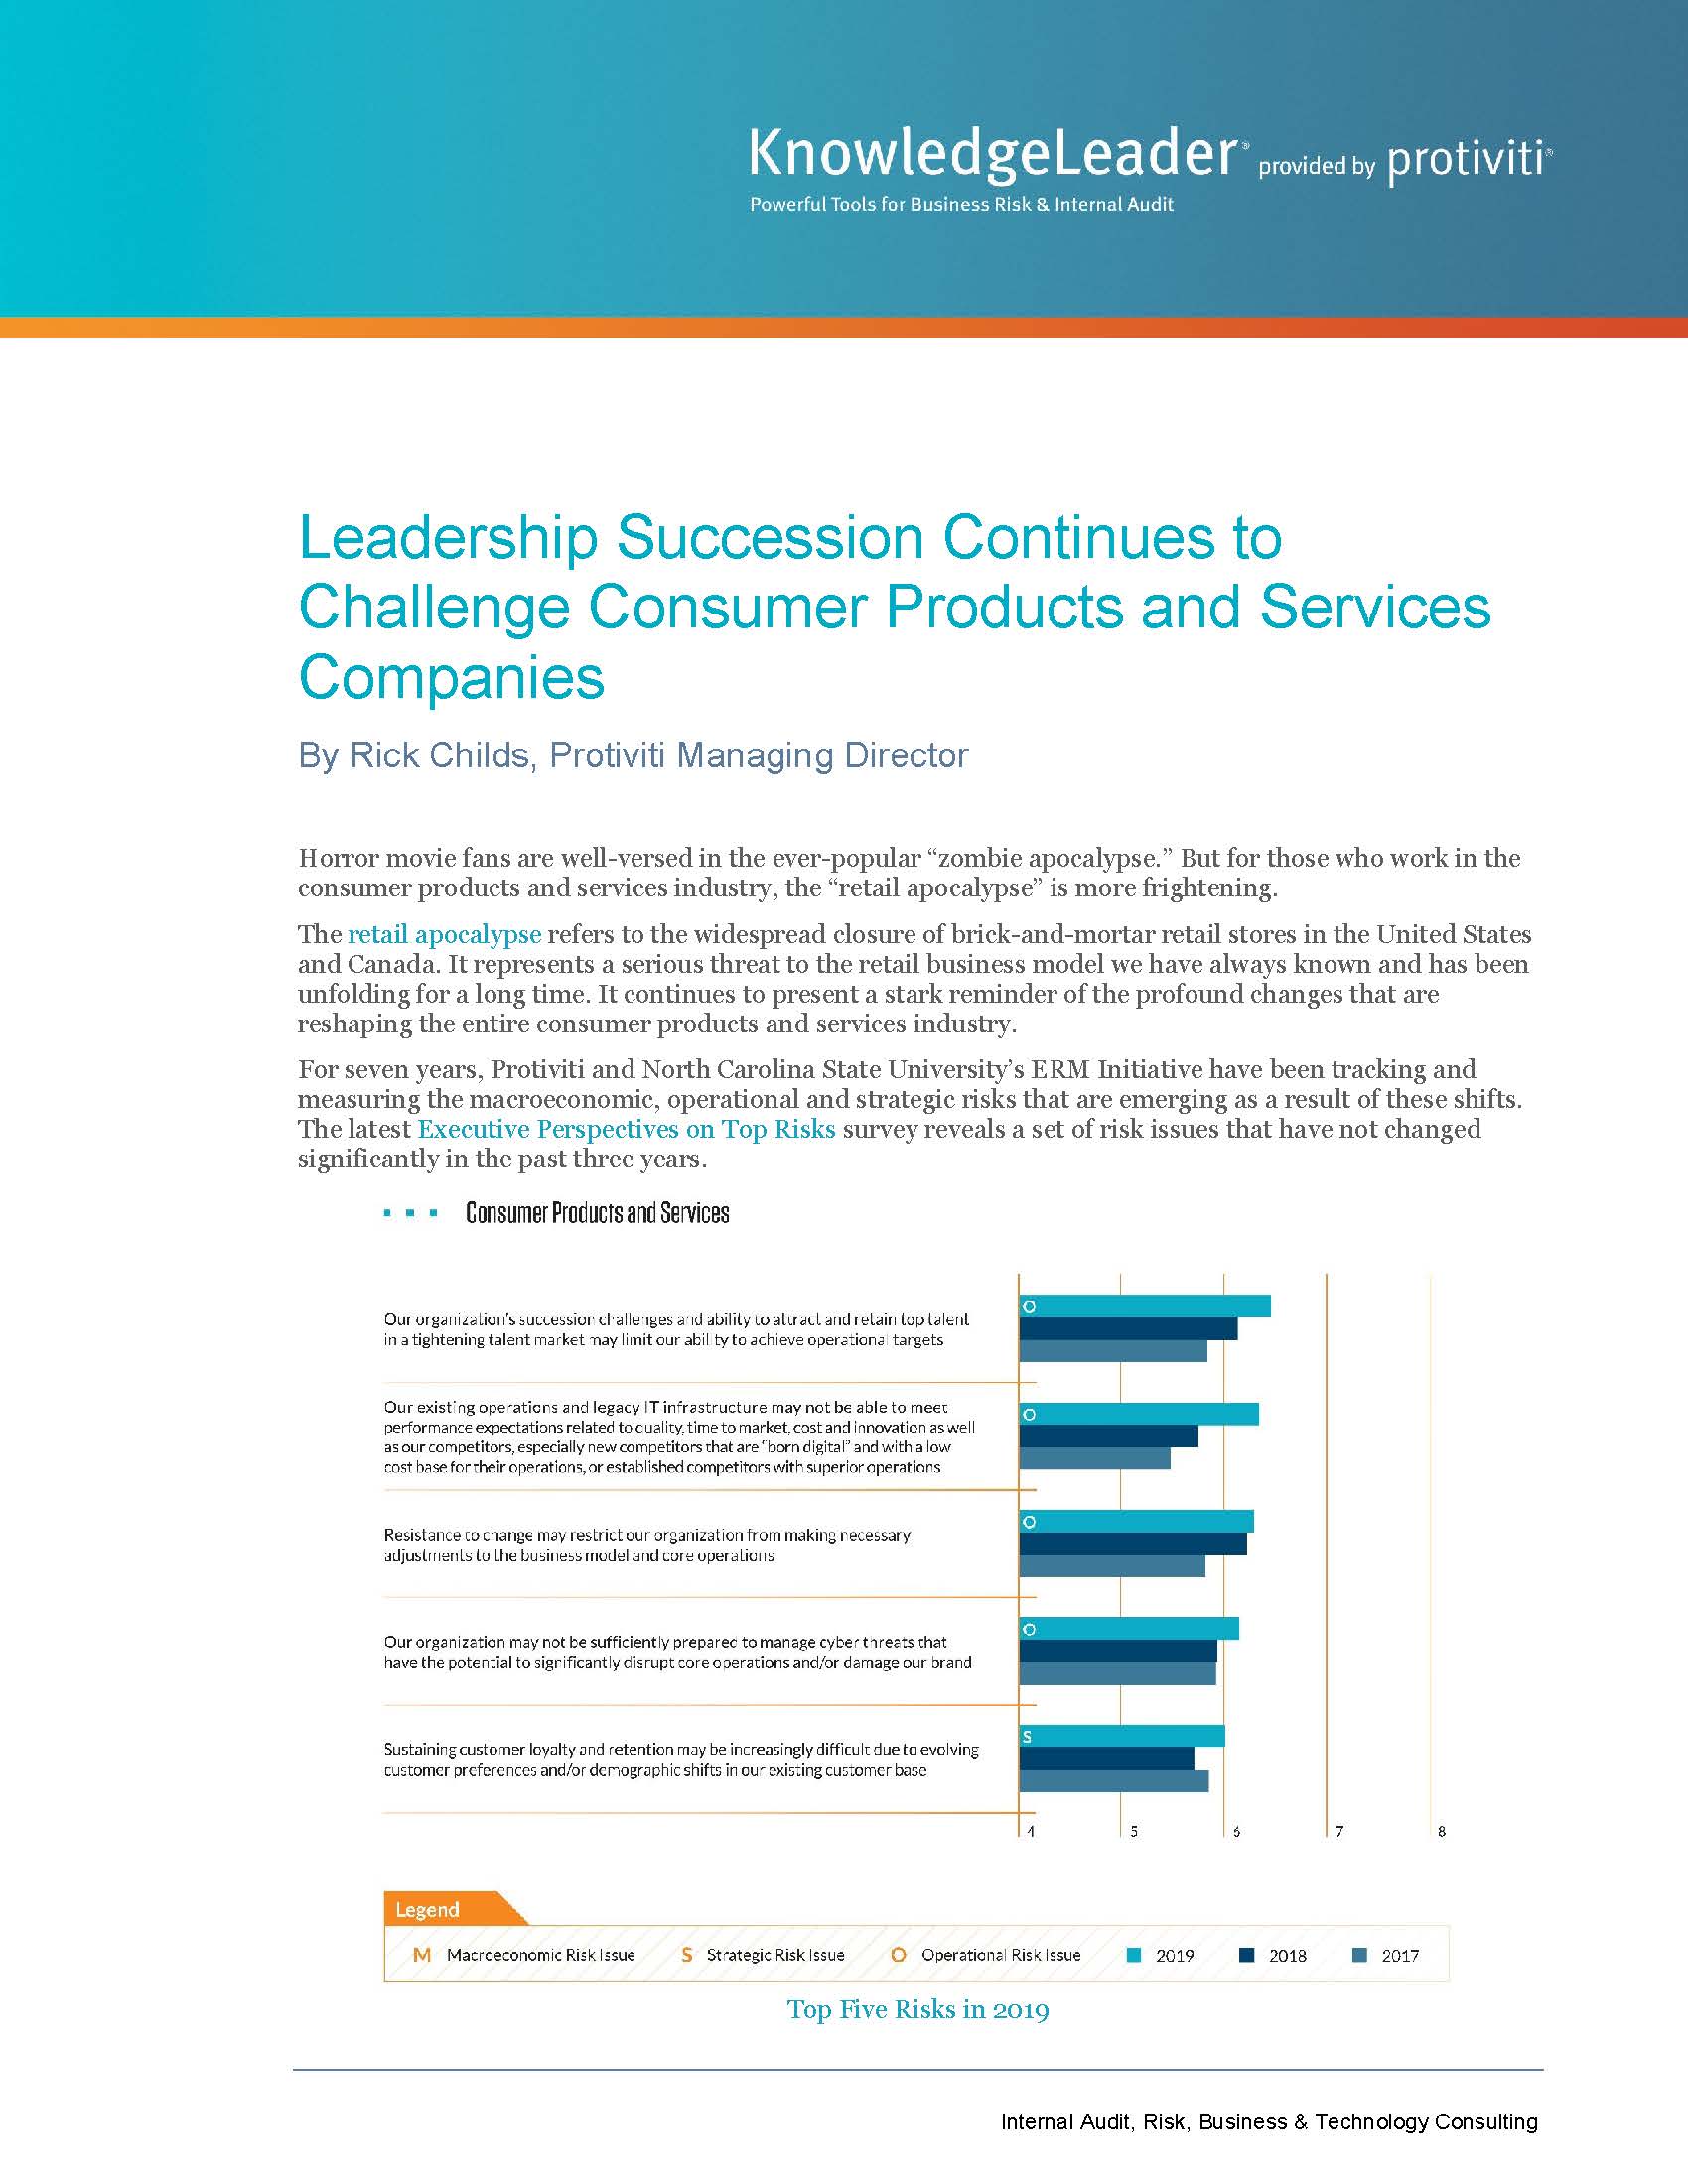 Screenshot of the first page of Leadership Succession Continues to Challenge Consumer Products and Services Companies